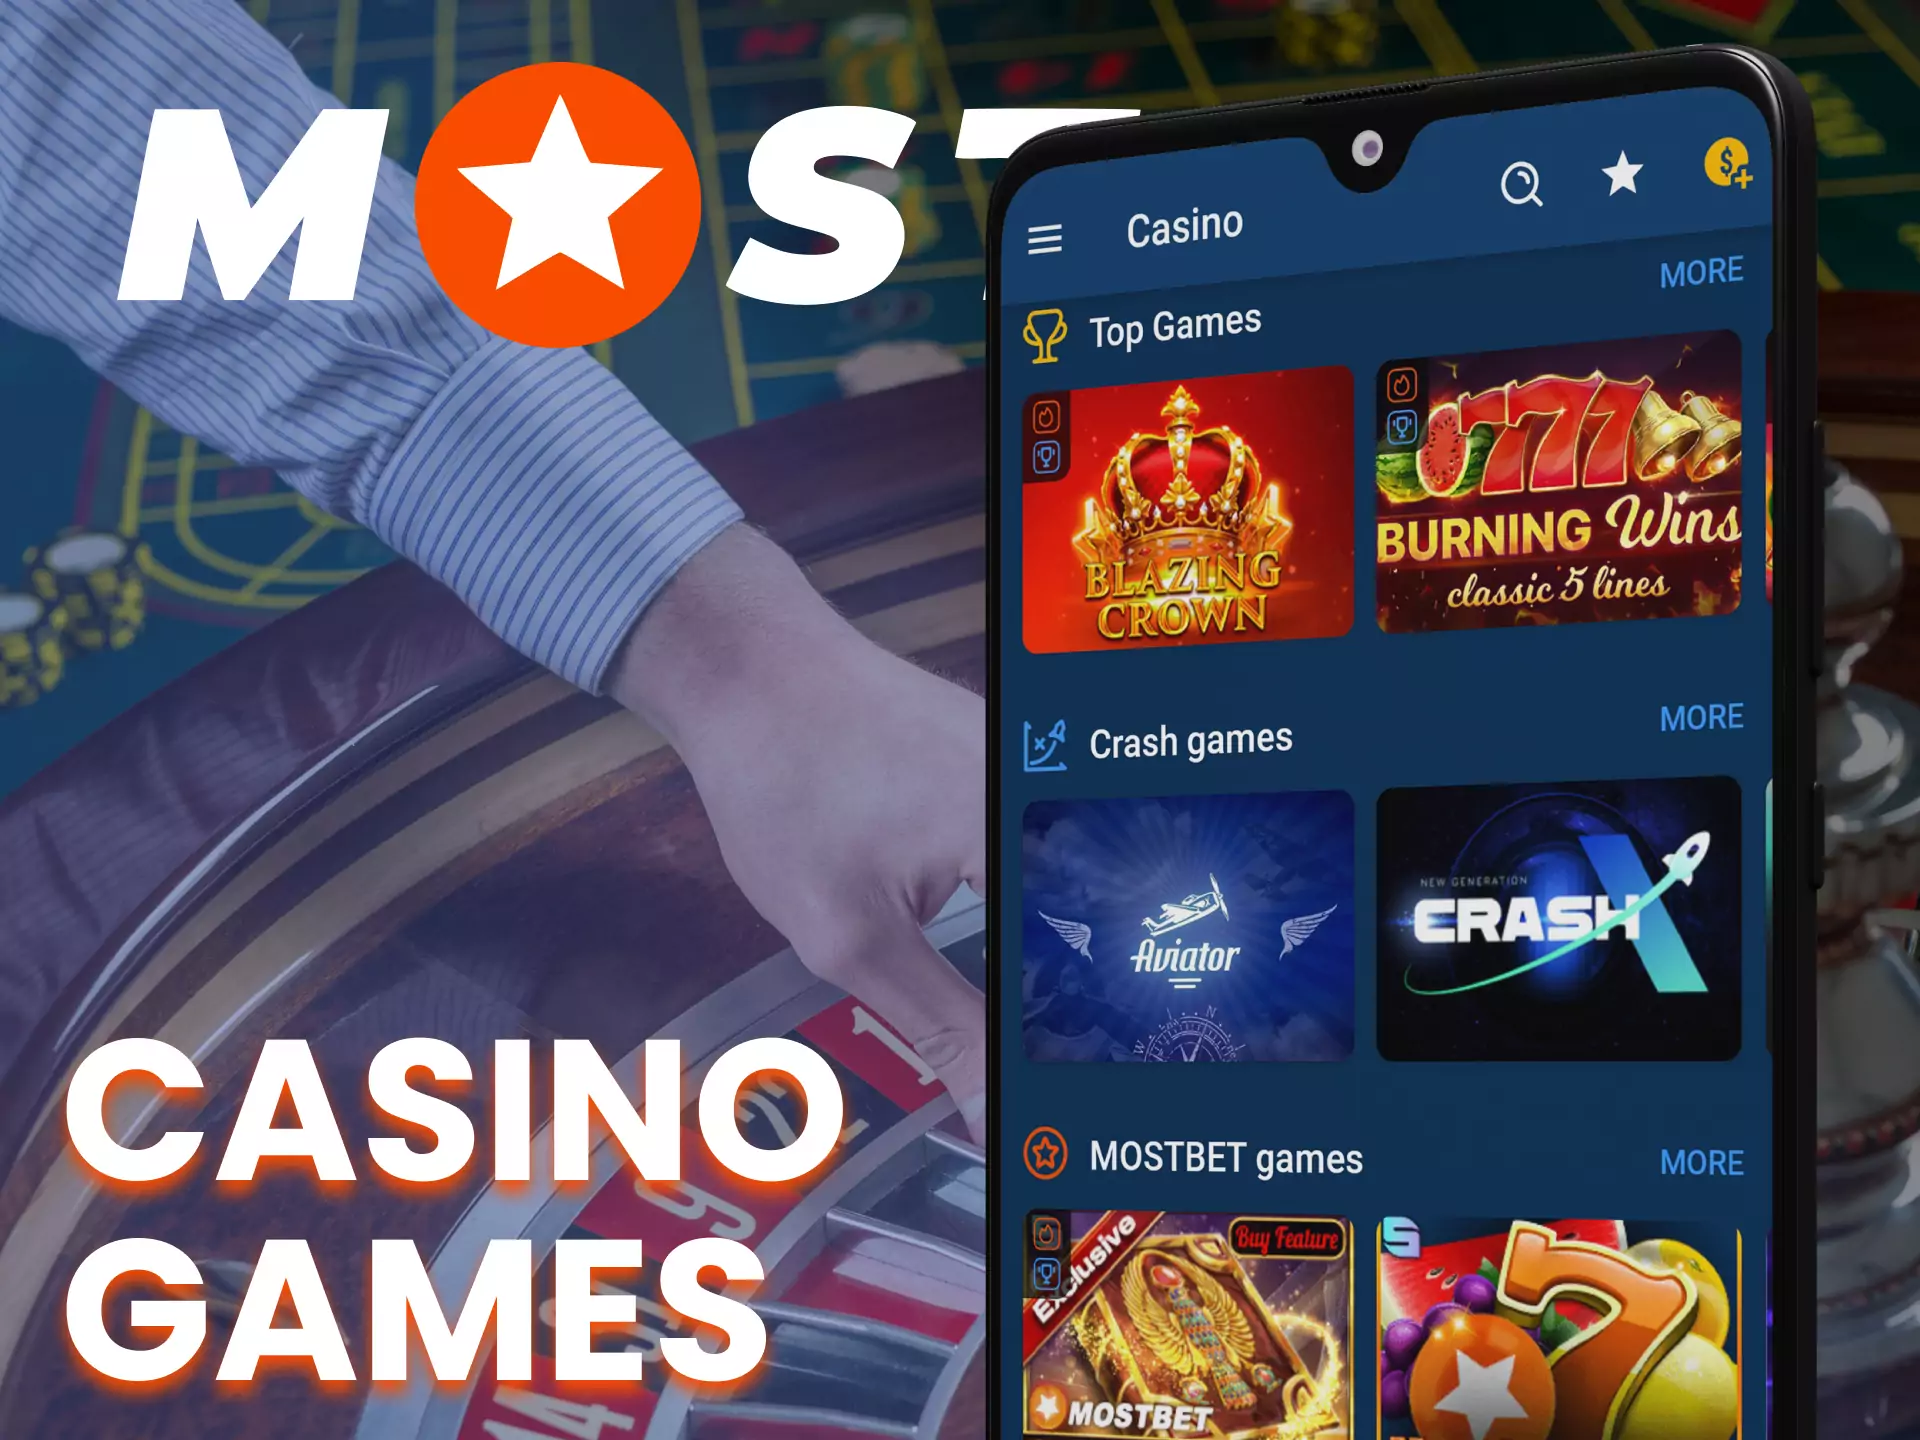 Play games at Casino in Mostbet app.